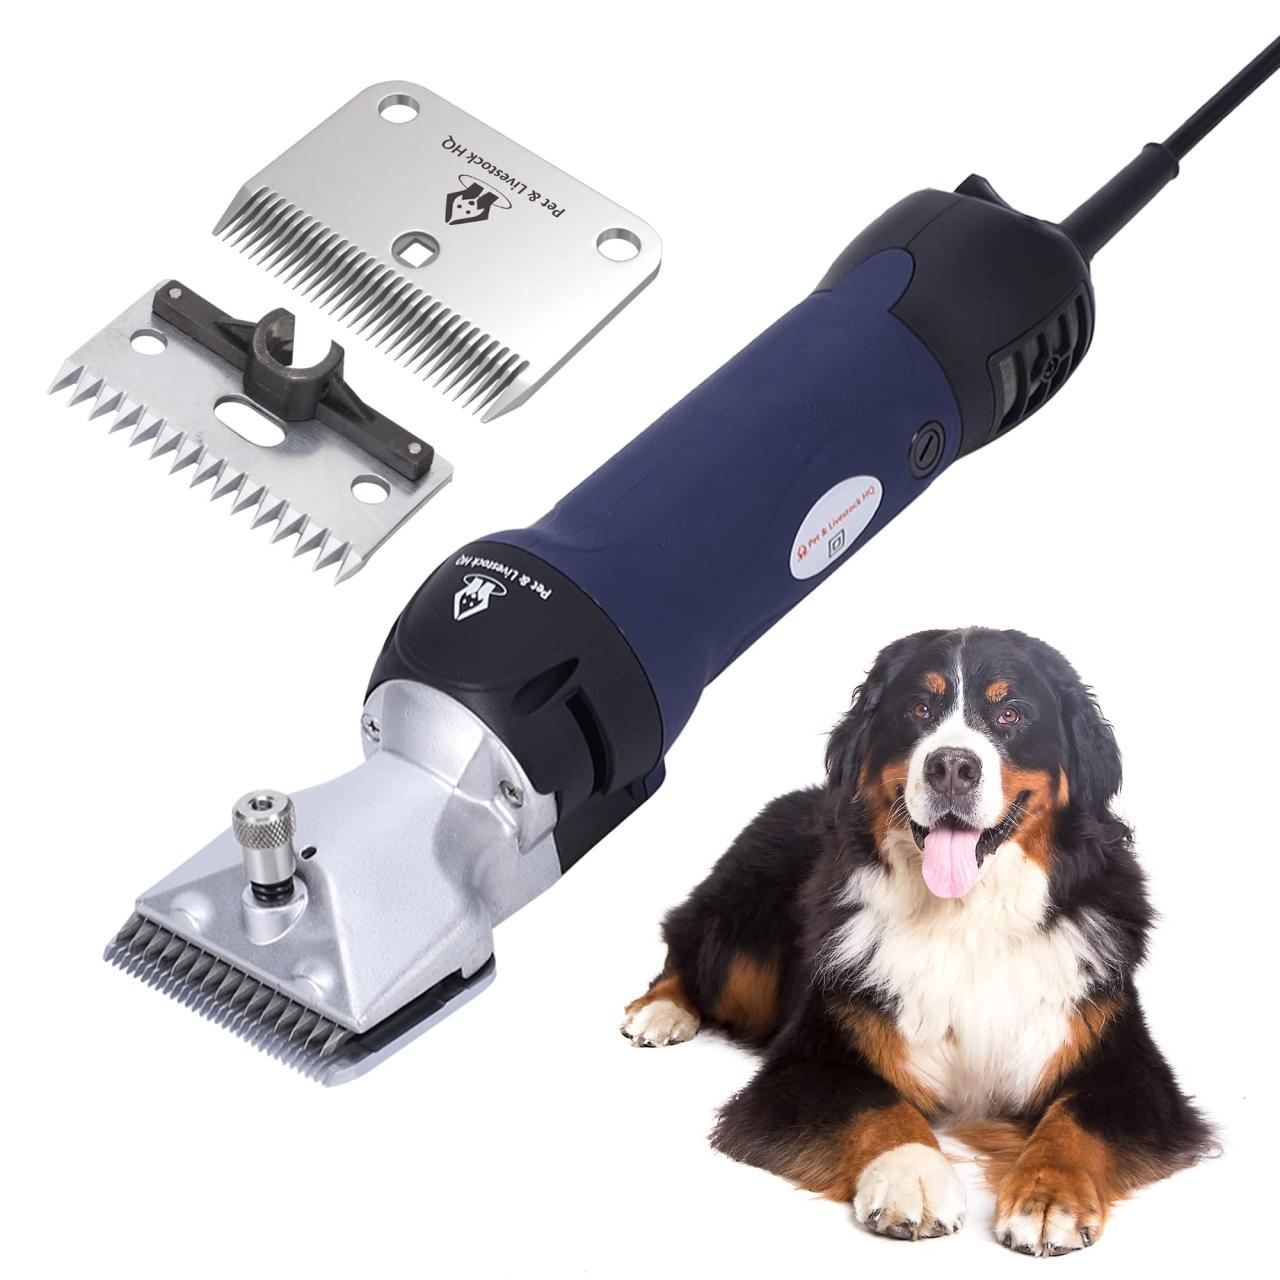 Pet & Livestock Hq 380W Professional Horse Dog Grooming Clippers Kit, Large  & Medium Dogs Haircut Machine, Heavy-Duty, Electric Hair Trimmer For Horses  Dogs With Thick Coats, Pigs & Cattle, 2 Blades :